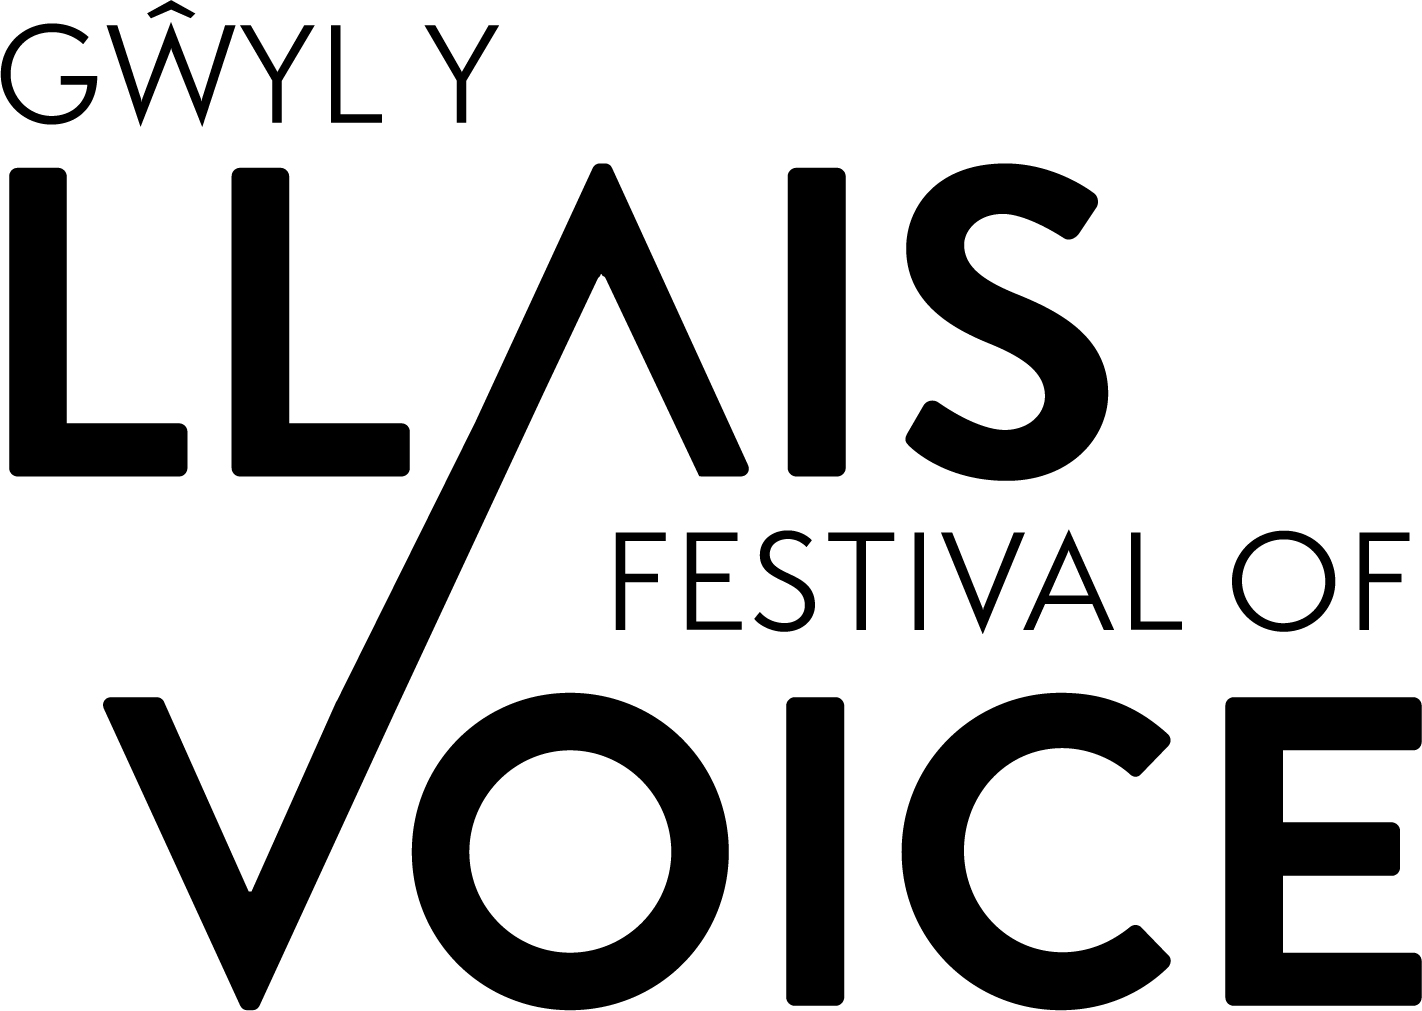 Festival of Voice -Wales Millennium Centre: The Open Fund for Organisations